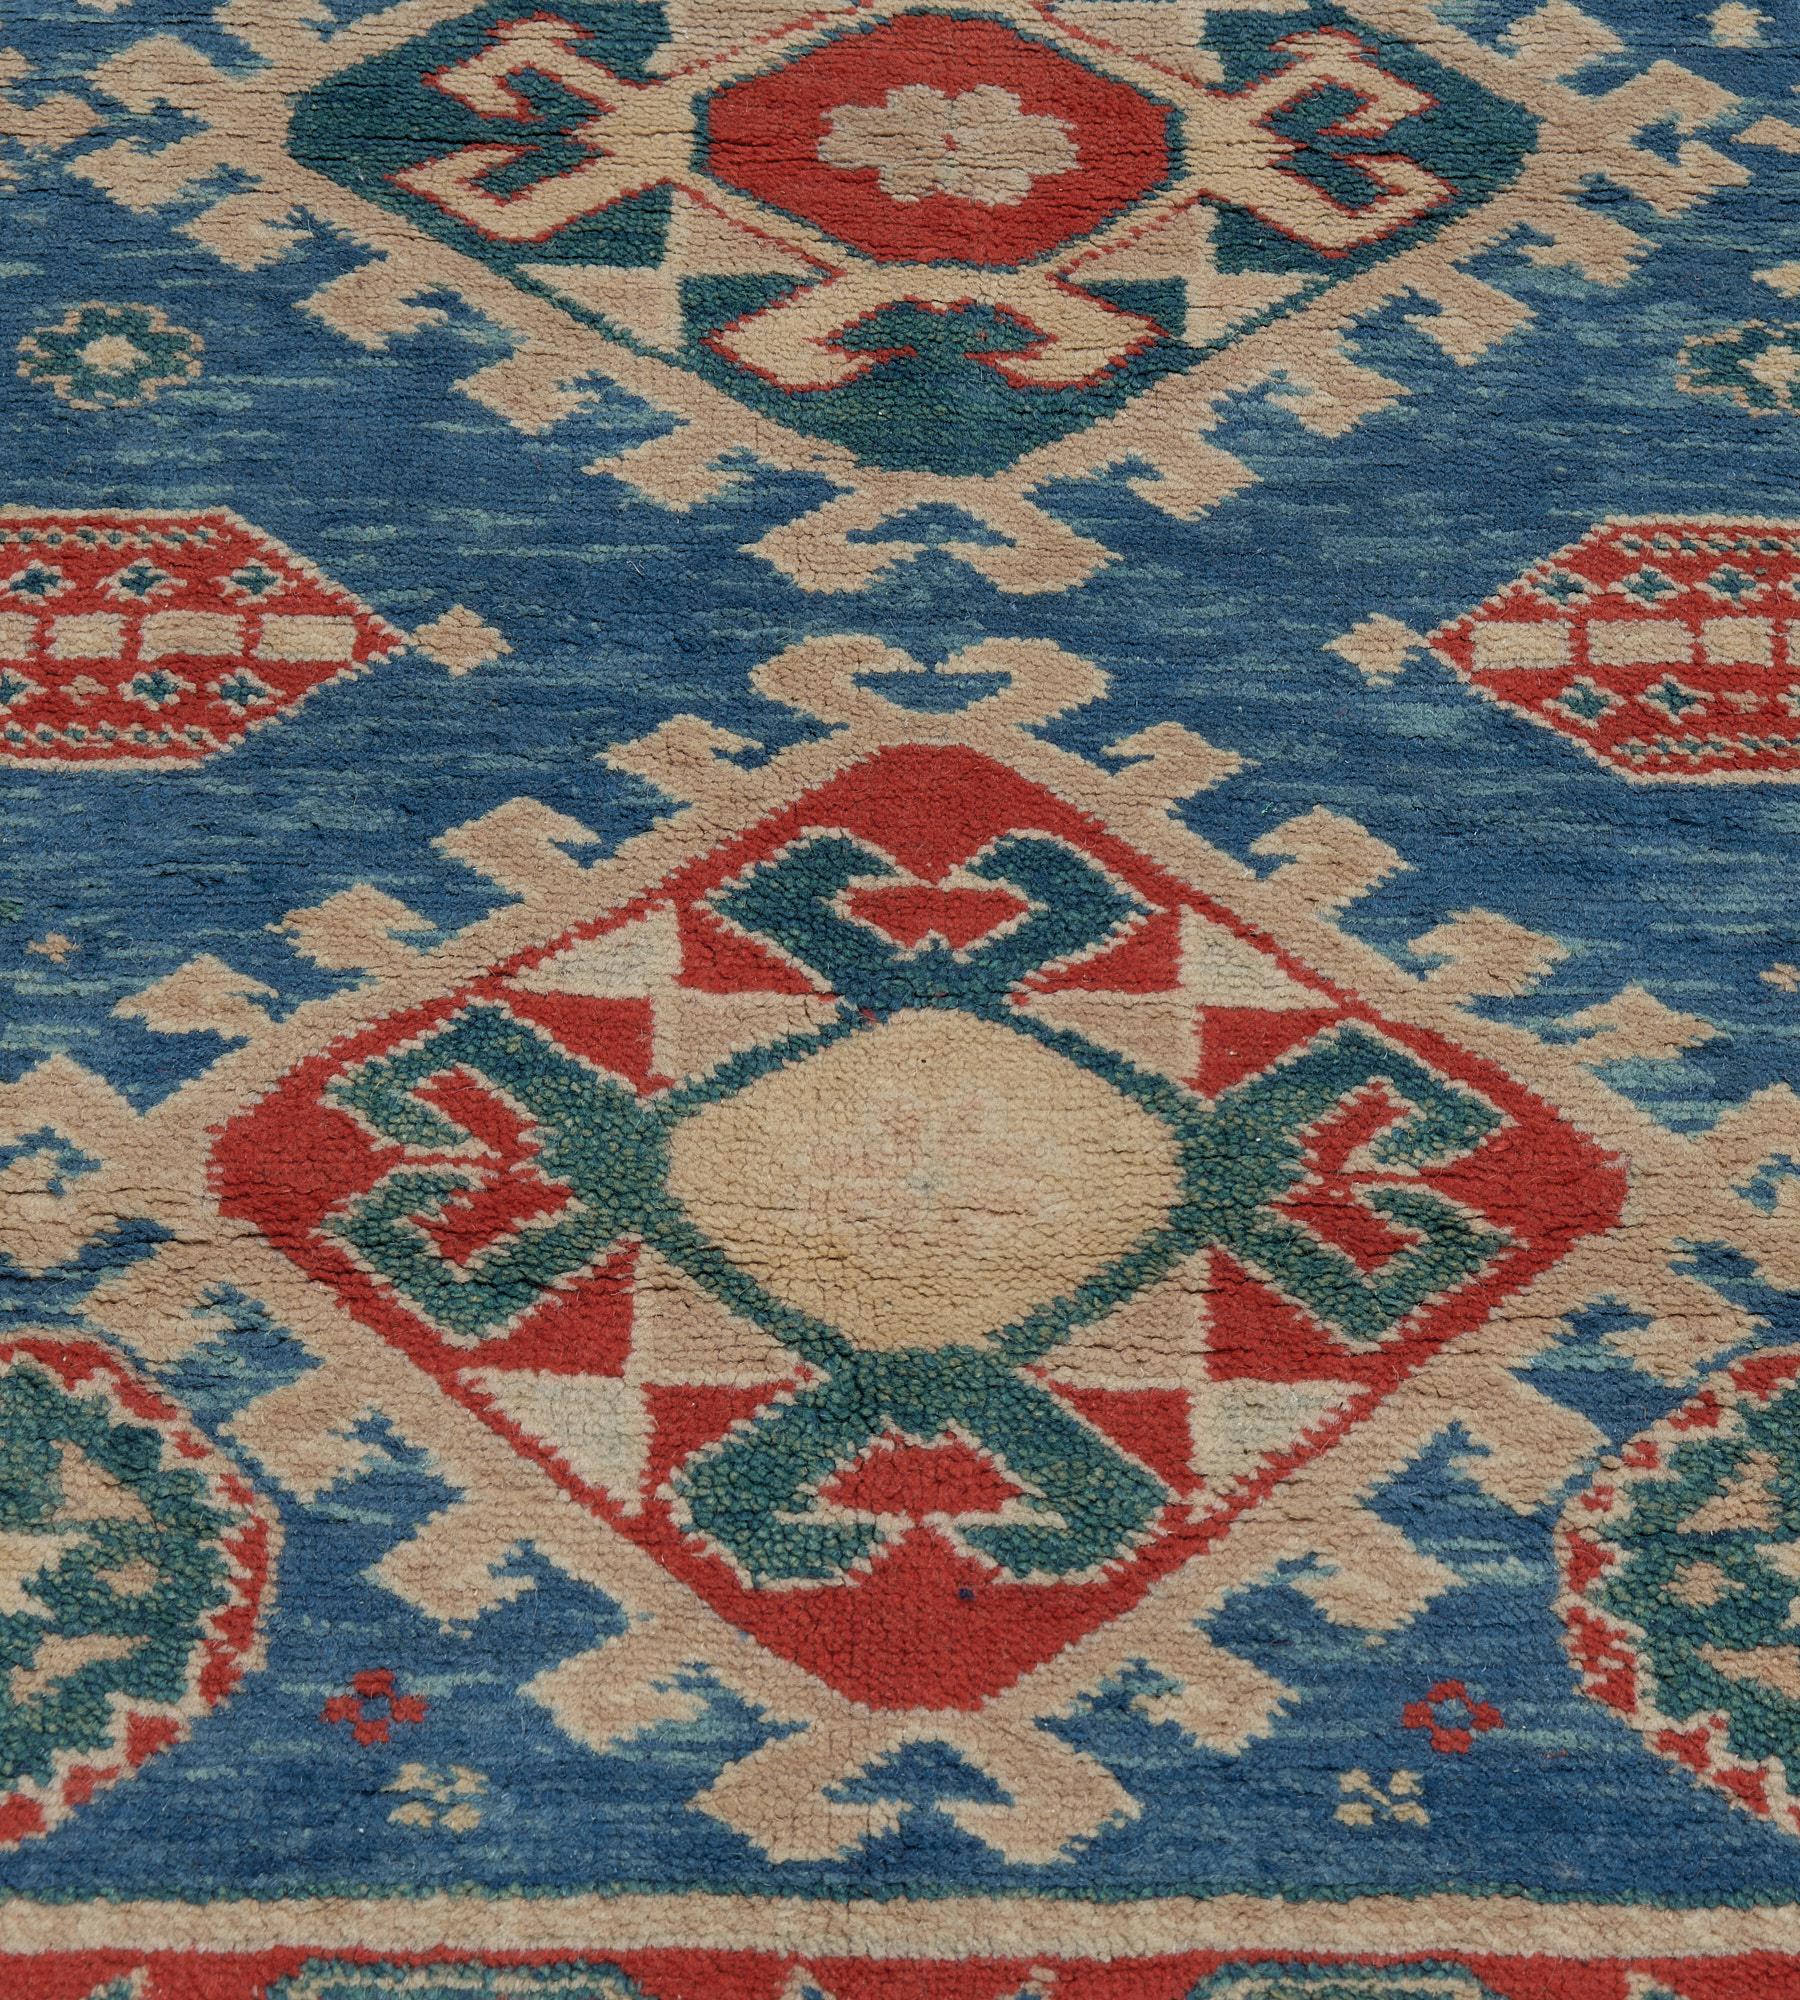 This traditional hand-woven Turkish rug has a vibrant blue field enclosing a central column of three serrated medallions, in a red floral vine border, between a diamond accented outer stripe and simple ivory inside stripe.